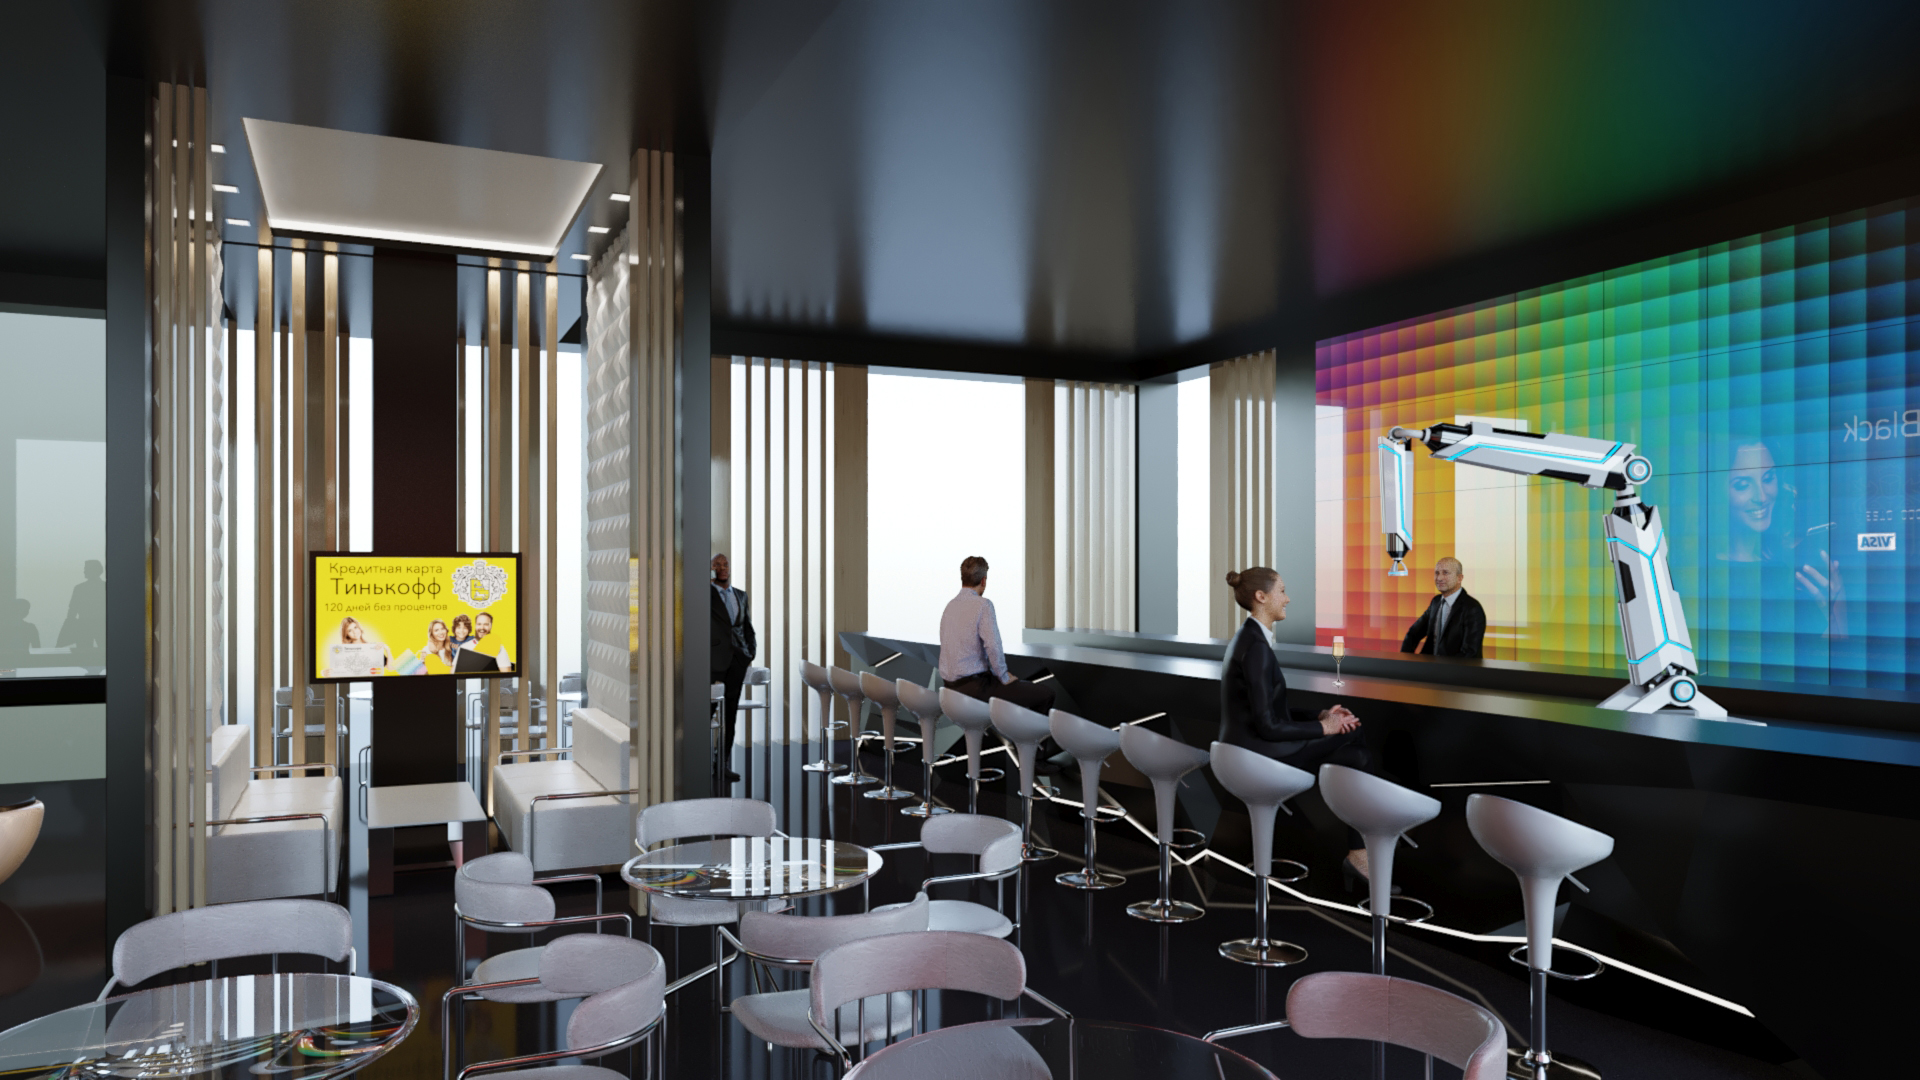 Tinkoff Restaurant Concept in 3d max corona render image